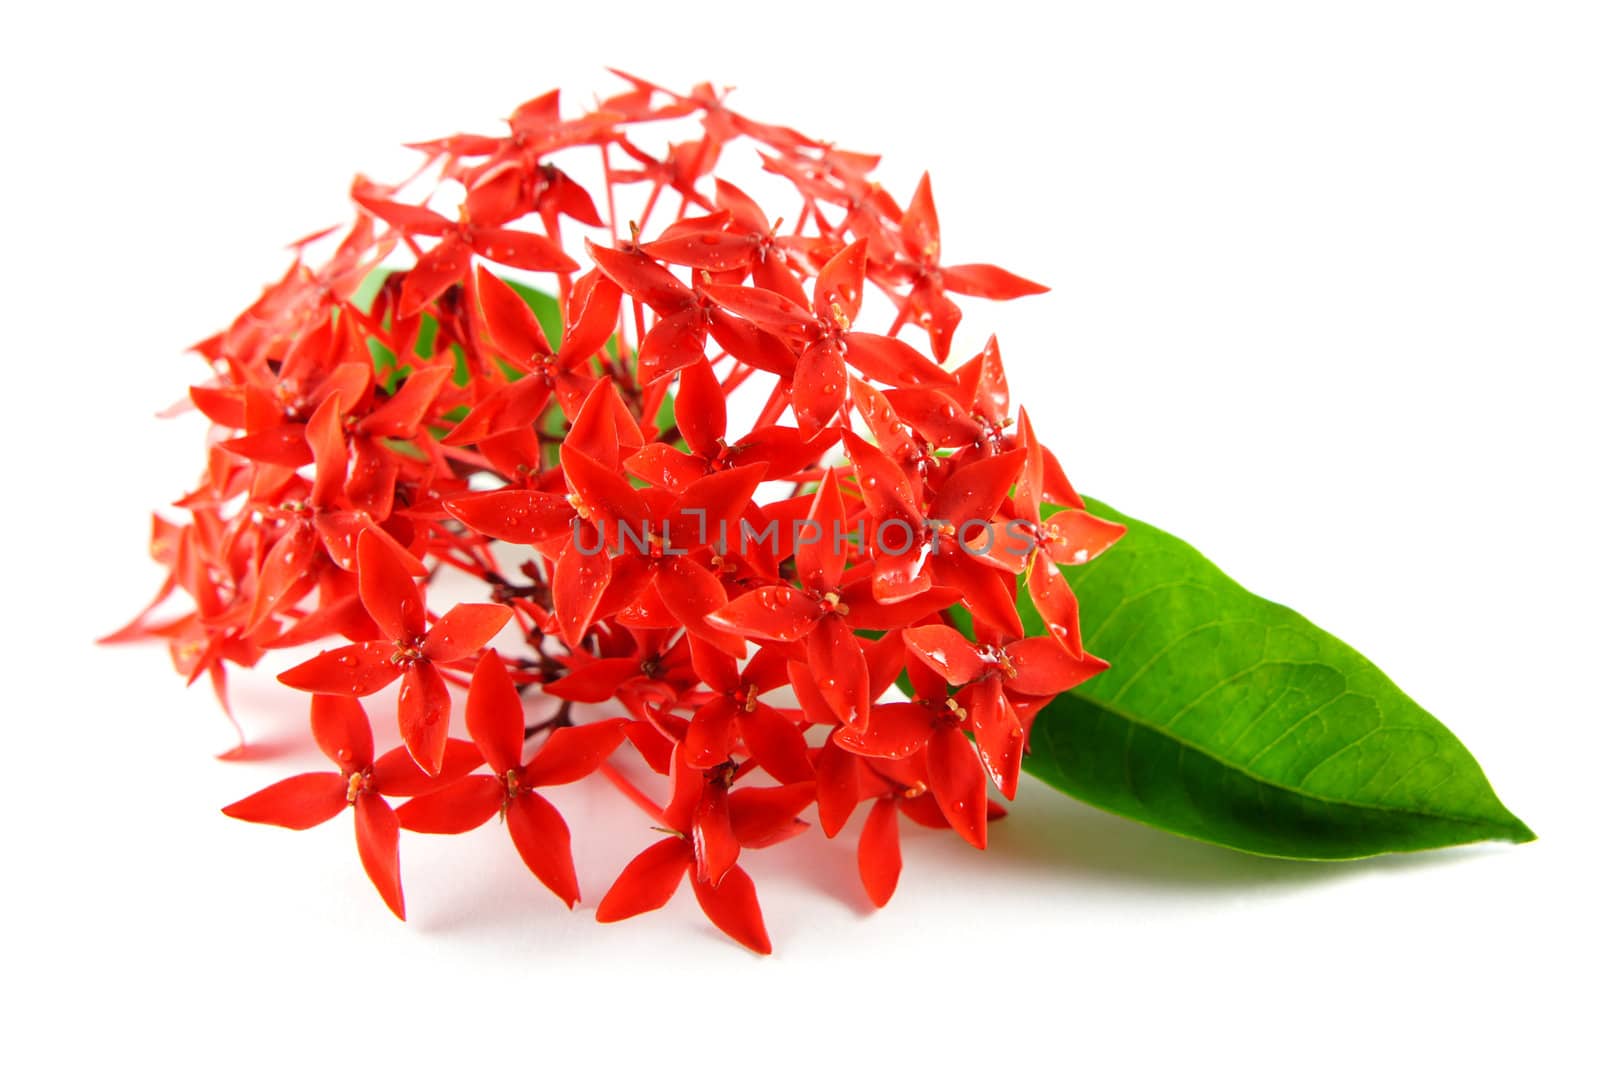 Smal red flowers with a green leaf isolated on white background.